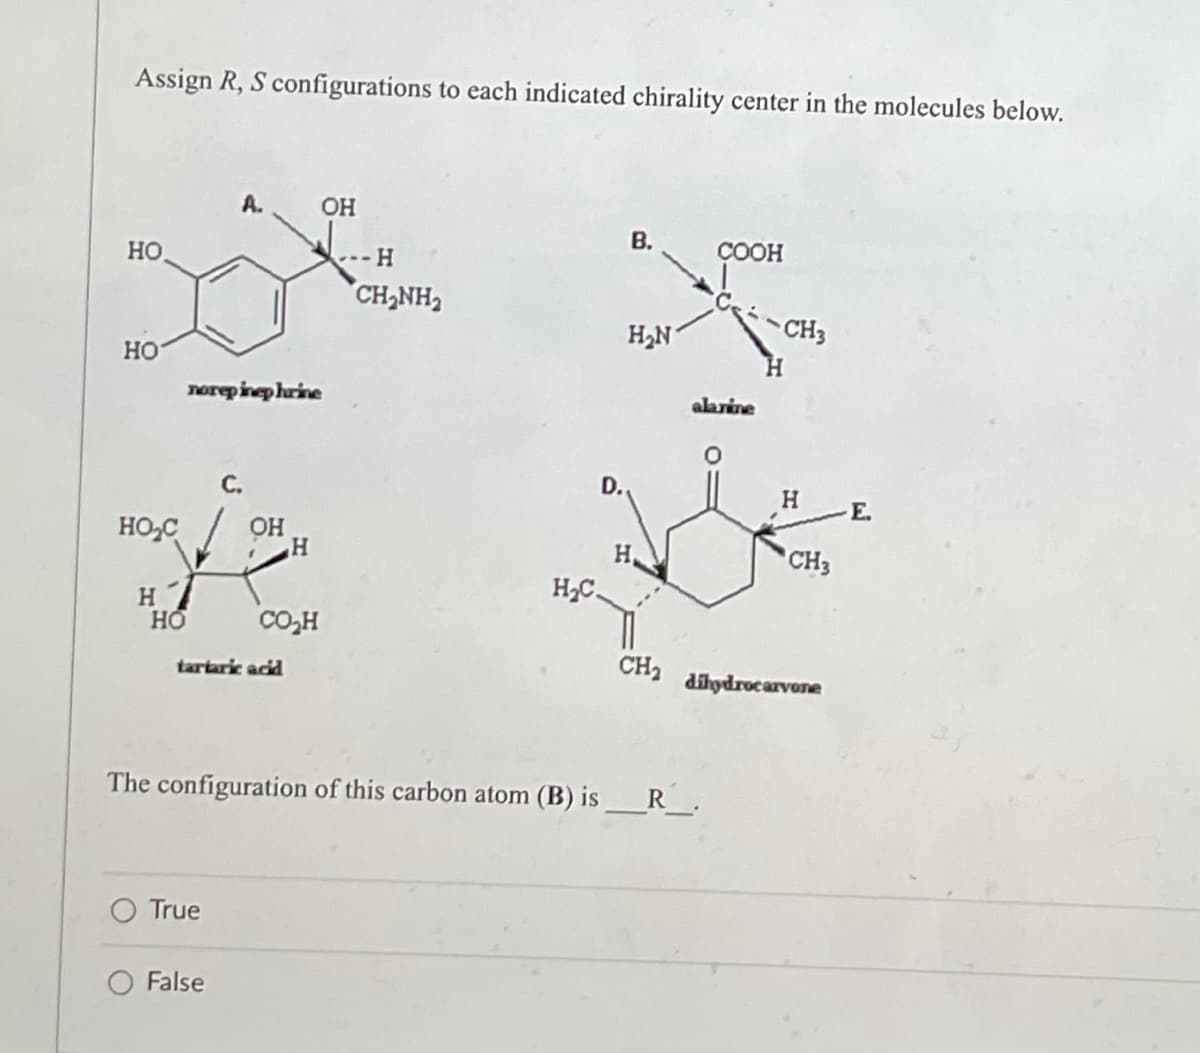 Assign R, S configurations to each indicated chirality center in the molecules below.
A.
OH
B.
HO
COOH
H₂N
norepinephrine
OH
HO
HO₂C
H
HO
H
CO₂H
-H
CH,NH,
D.
H₂C.
H
alarine
-CH3
H
CH₂
tartaric acid
The configuration of this carbon atom (B) is__R___.
O True
False
H
CH3
dihydrocarvone
E.